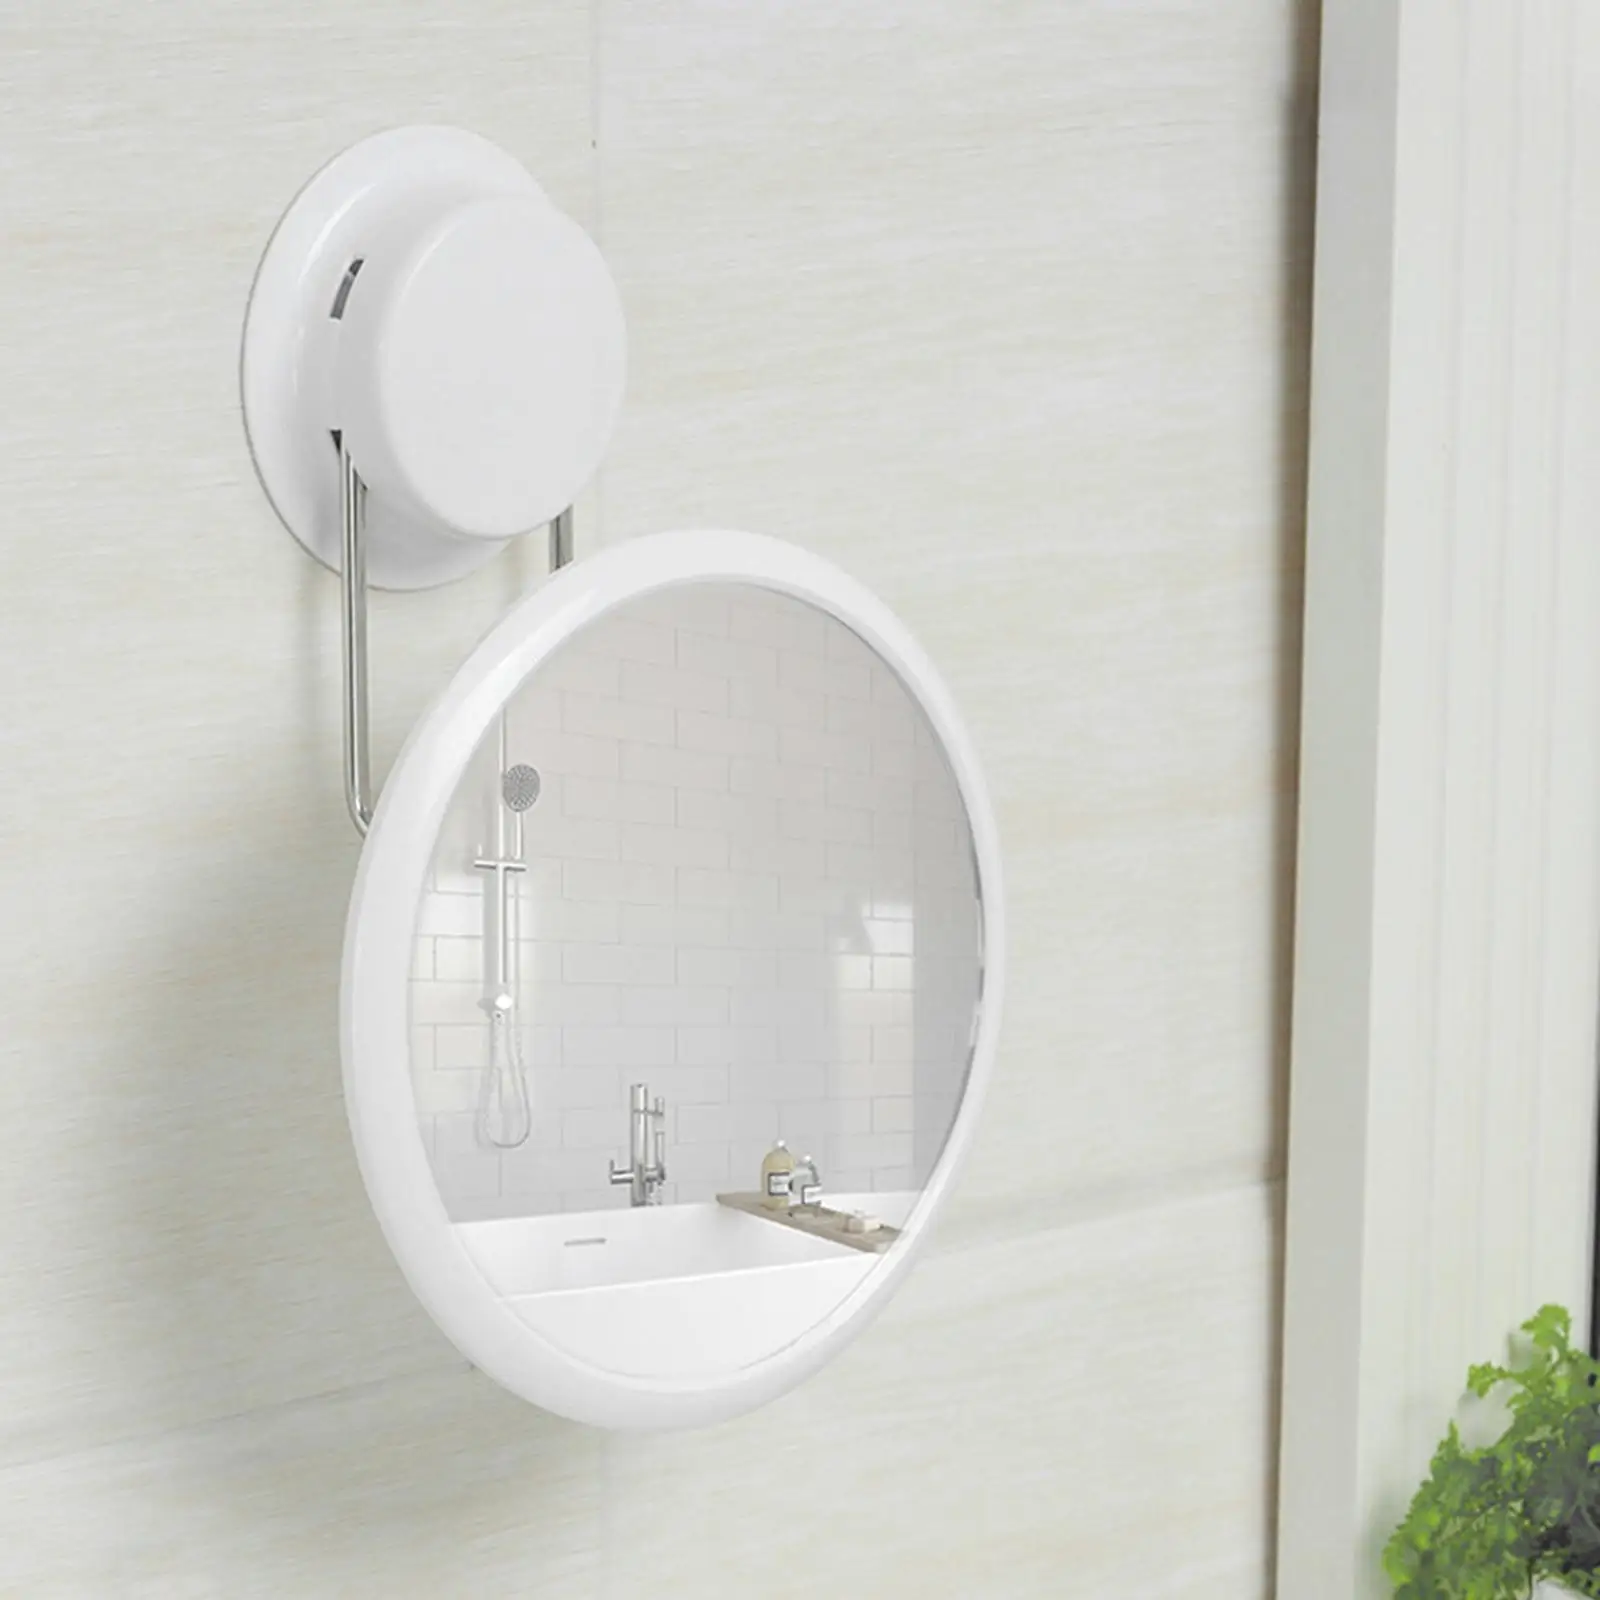 Wall Mounted Makeup Mirror Punch Free Foldable Rotating Easy to Clean Without Traces Mirror Dressing Mirror No Nails Plastic